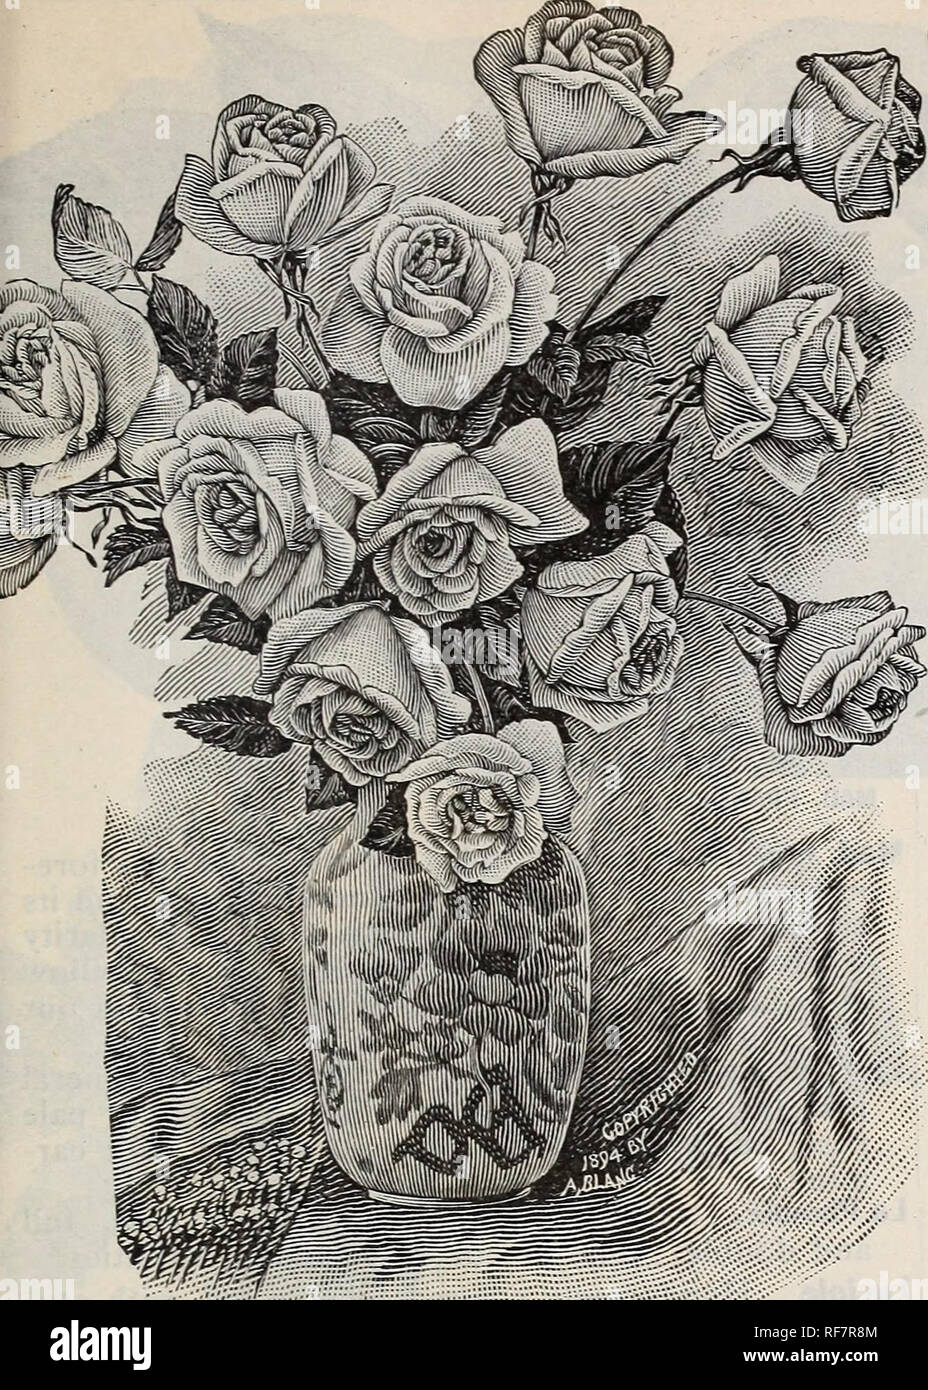 . Spring 1900. Nursery stock Ohio Painesville Catalogs; Vegetables Seeds Catalogs; Flowers Catalogs; Bulbs (Plants) Catalogs; Plants, Ornamental Catalogs; Fruit trees Seedlings Catalogs; Fruit Catalogs. ROSES. 105. BRIDESMAID. Bridesmaid. The most popular pink Tea Rose. Thou- sands of this variety are grown every year for cut 2 flowers, and it is also very desirable for summer bedding out of doors. It is a delightful shade of bright pink, very free flowering and easily grown. As a pot plant for house or summer blooming outside it has no equal. Baron Berge, A soft lemon white at base of petals, Stock Photo